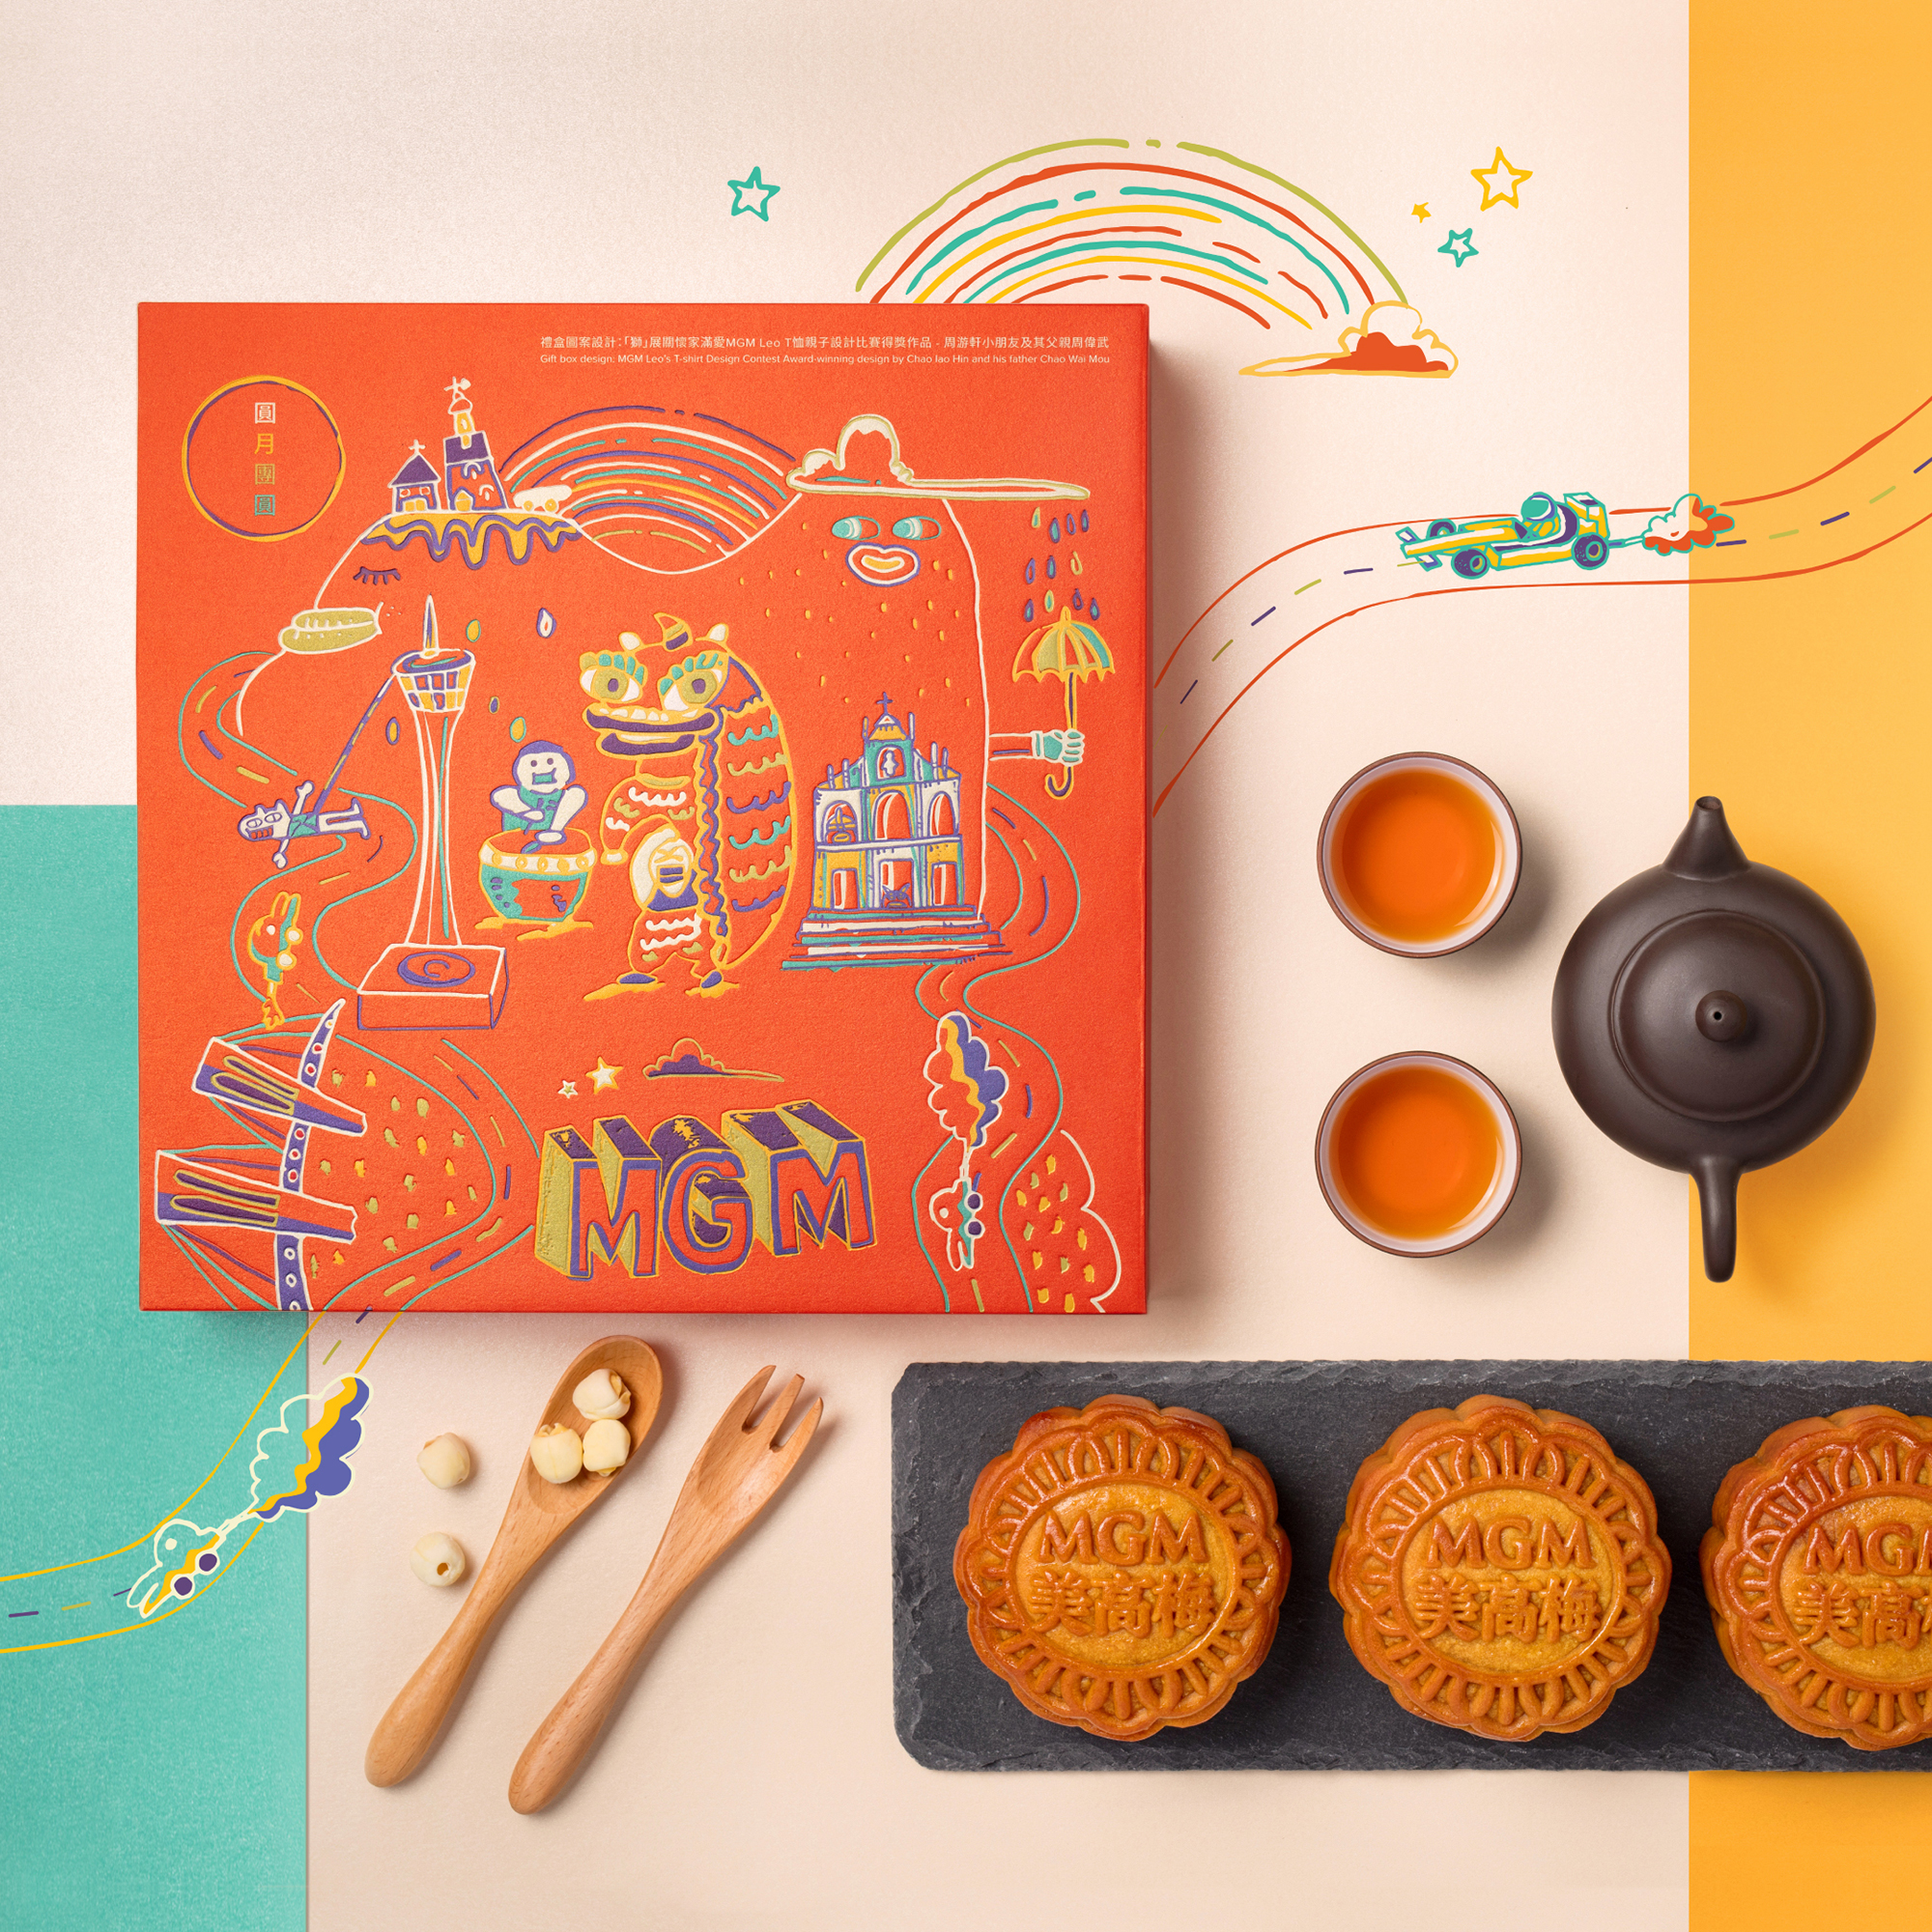 The Most Luxurious Mooncake Boxes in Mid-Autumn 2021